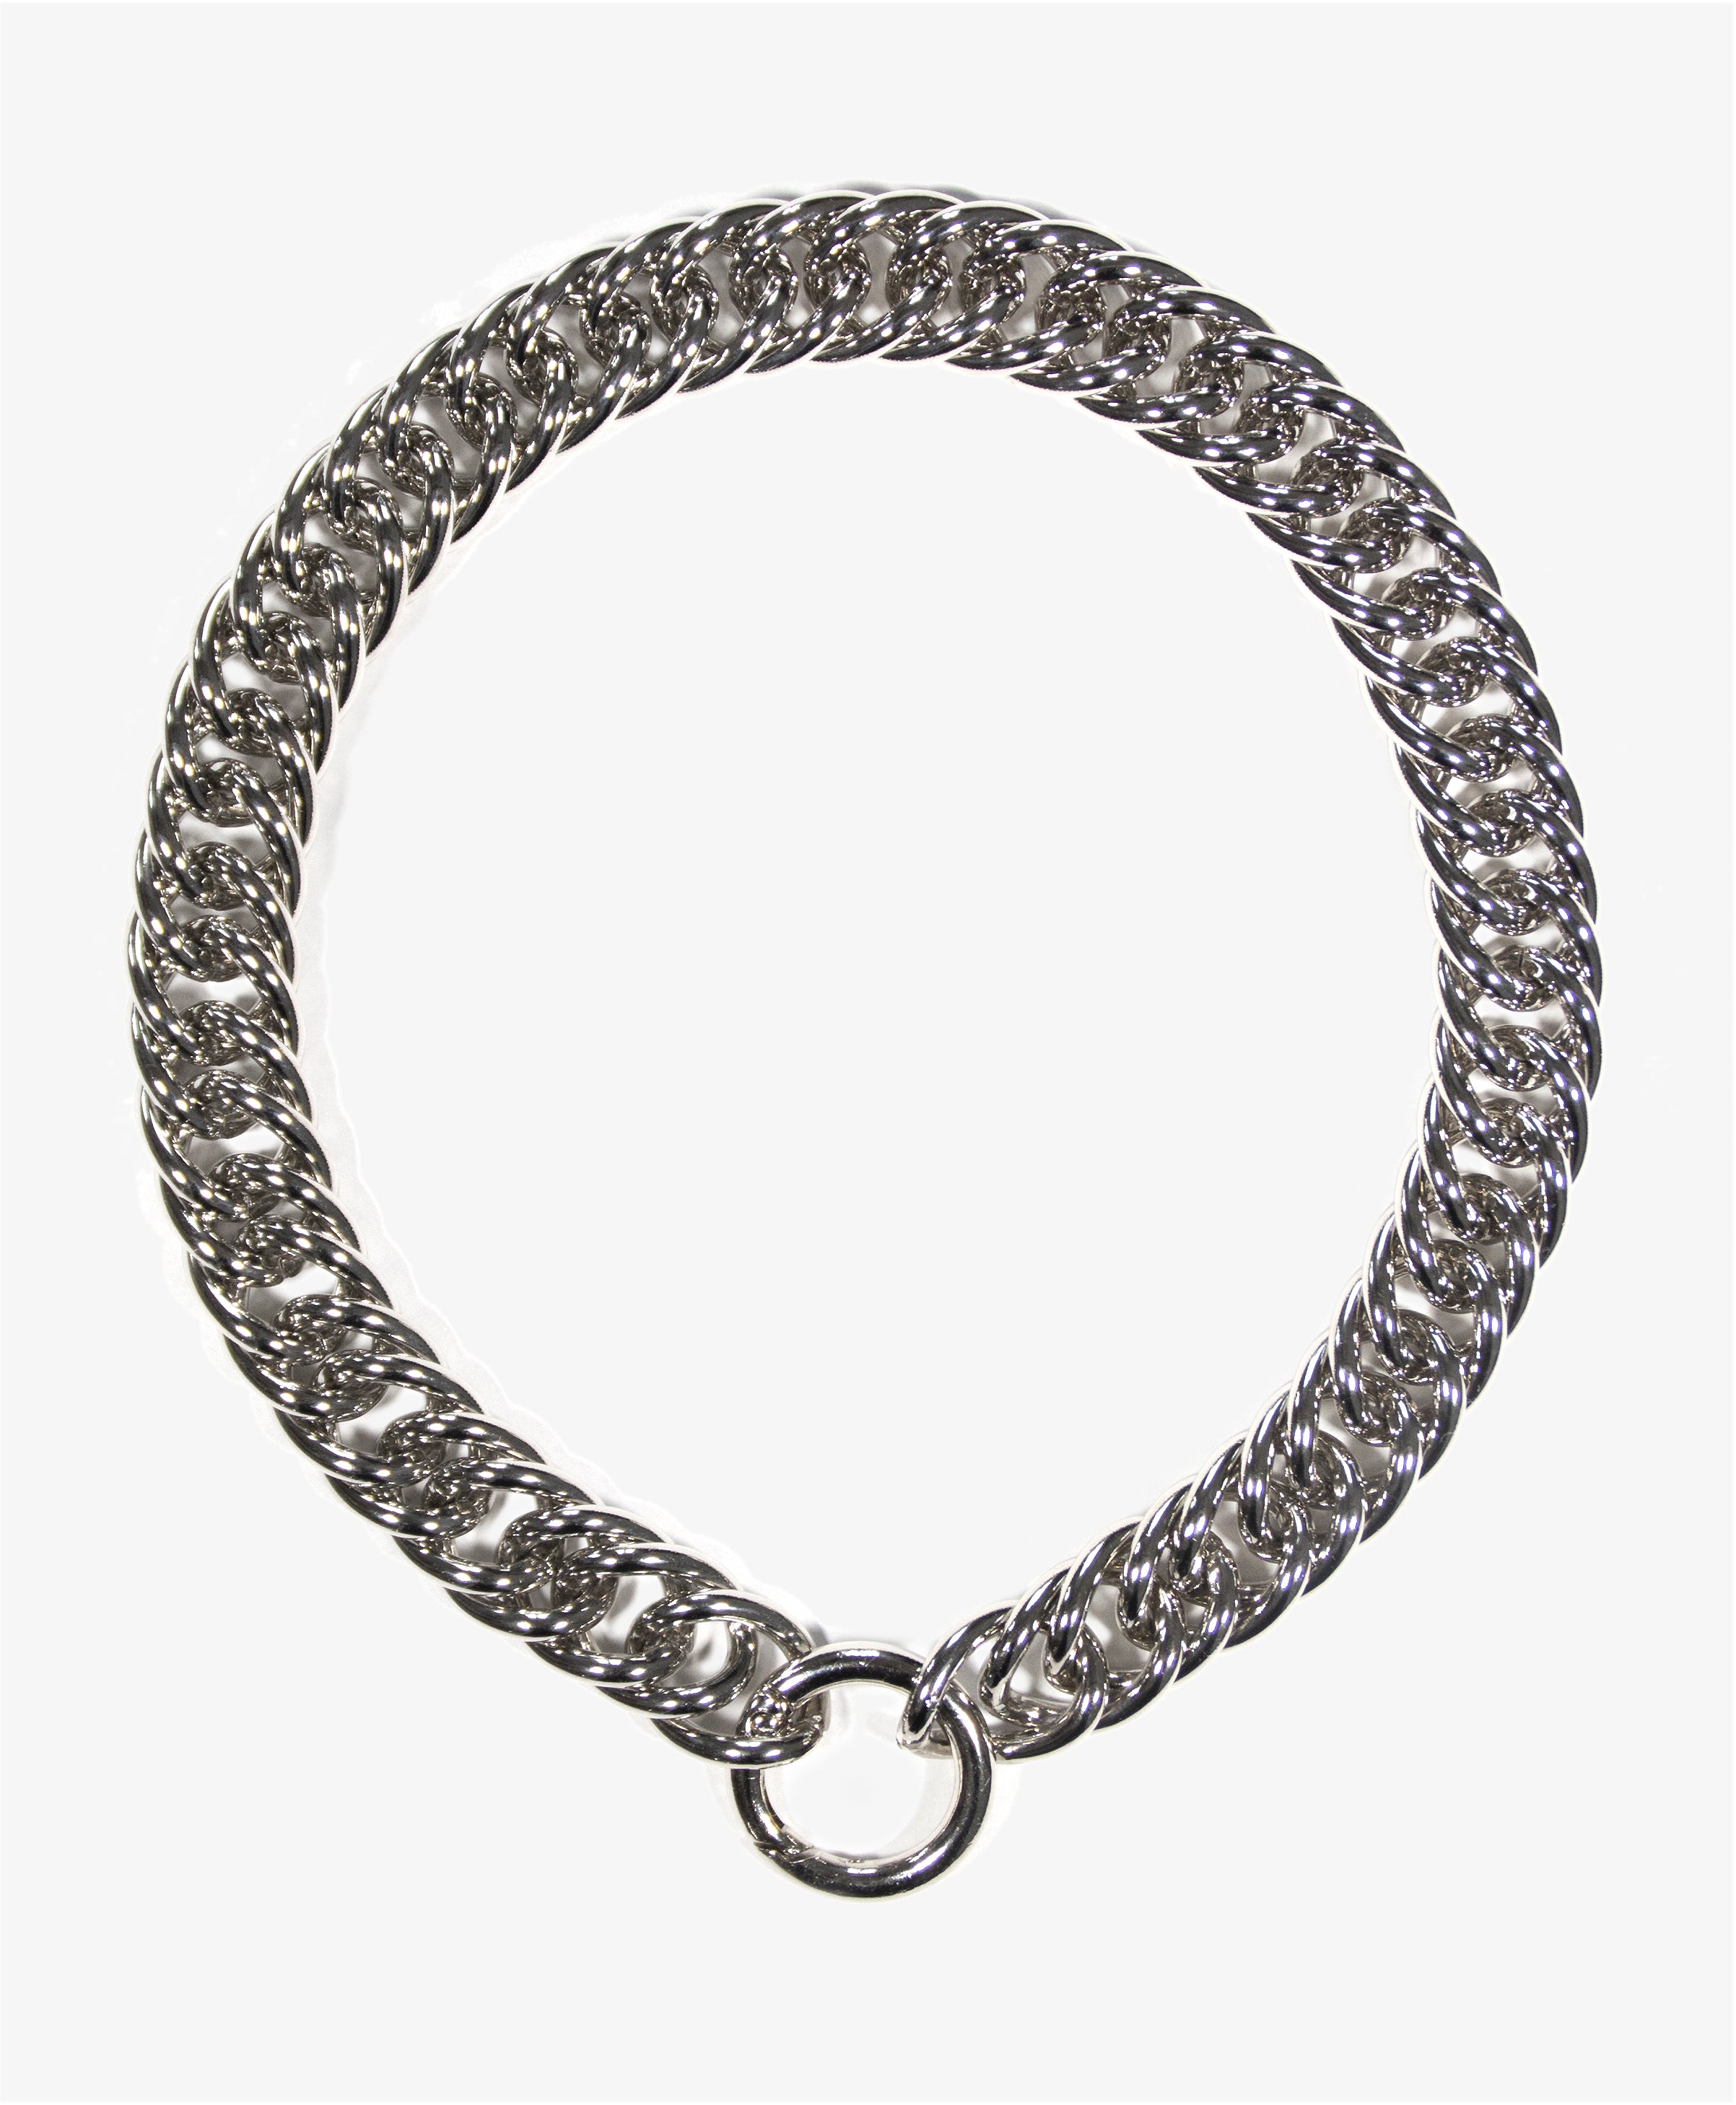 llayers-mens-women-jewelry-silver-stainlesssteel-choker-chain-necklace-unchained-006-Brooklyn-New-York-1